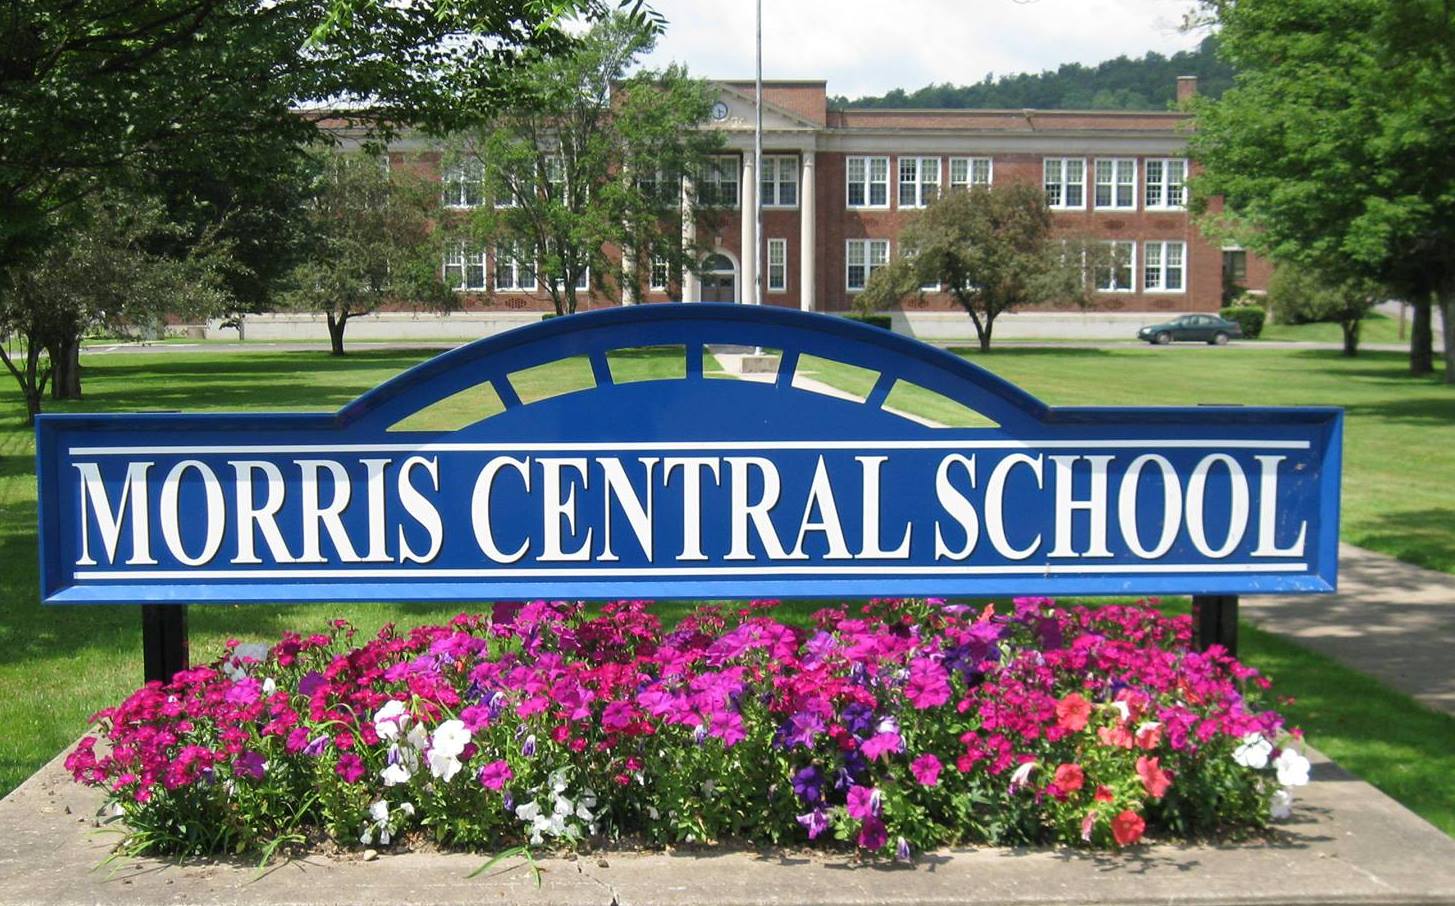 The front of Morris Central School